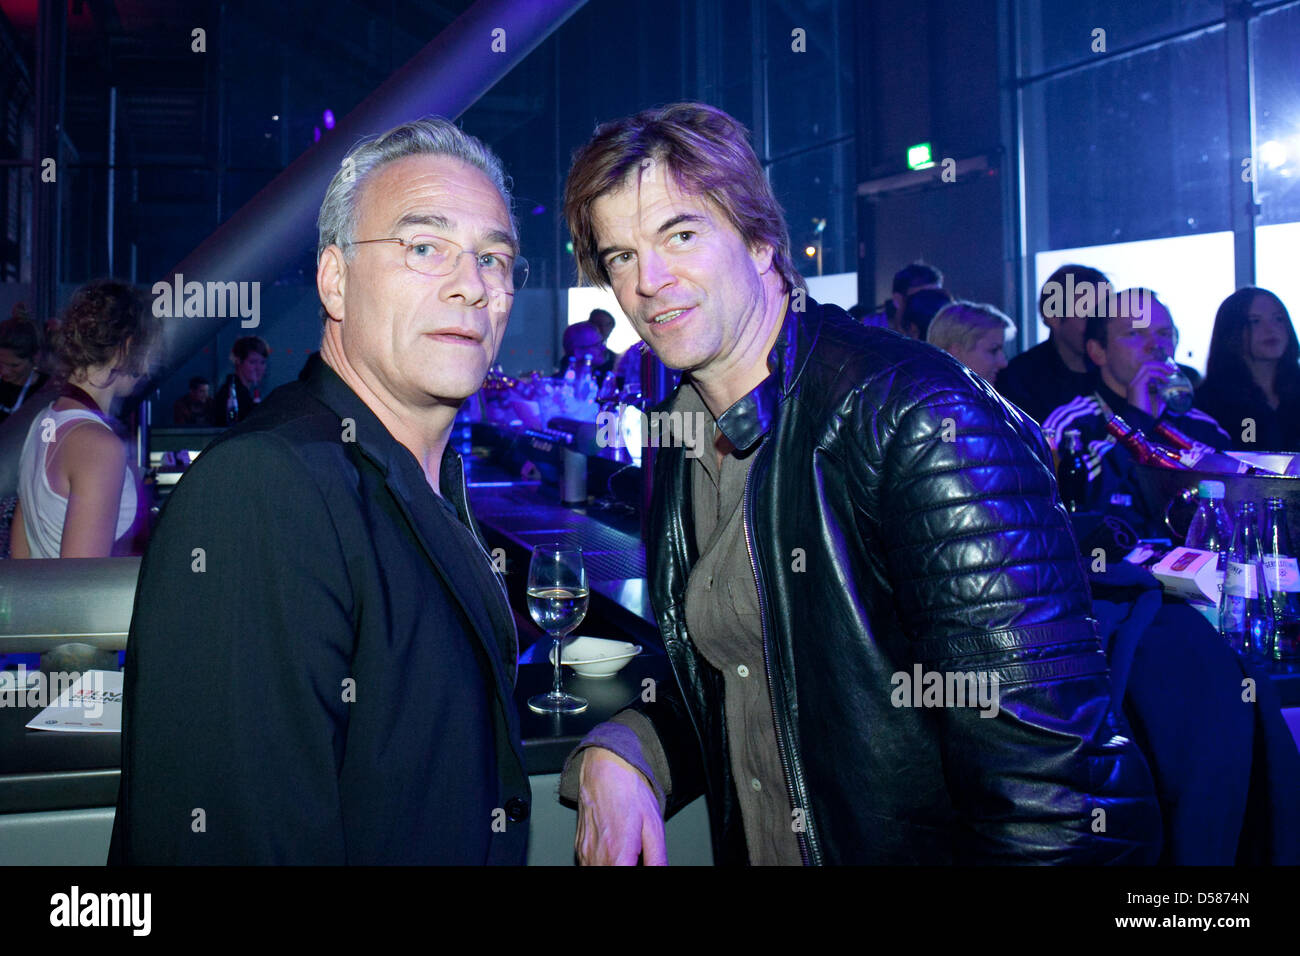 Klaus J. Behrendt, Campino at 1Live Krone Awards at Jahrhunderthalle - aftershow party. Bochum, Germany - 08.12.2011 Stock Photo